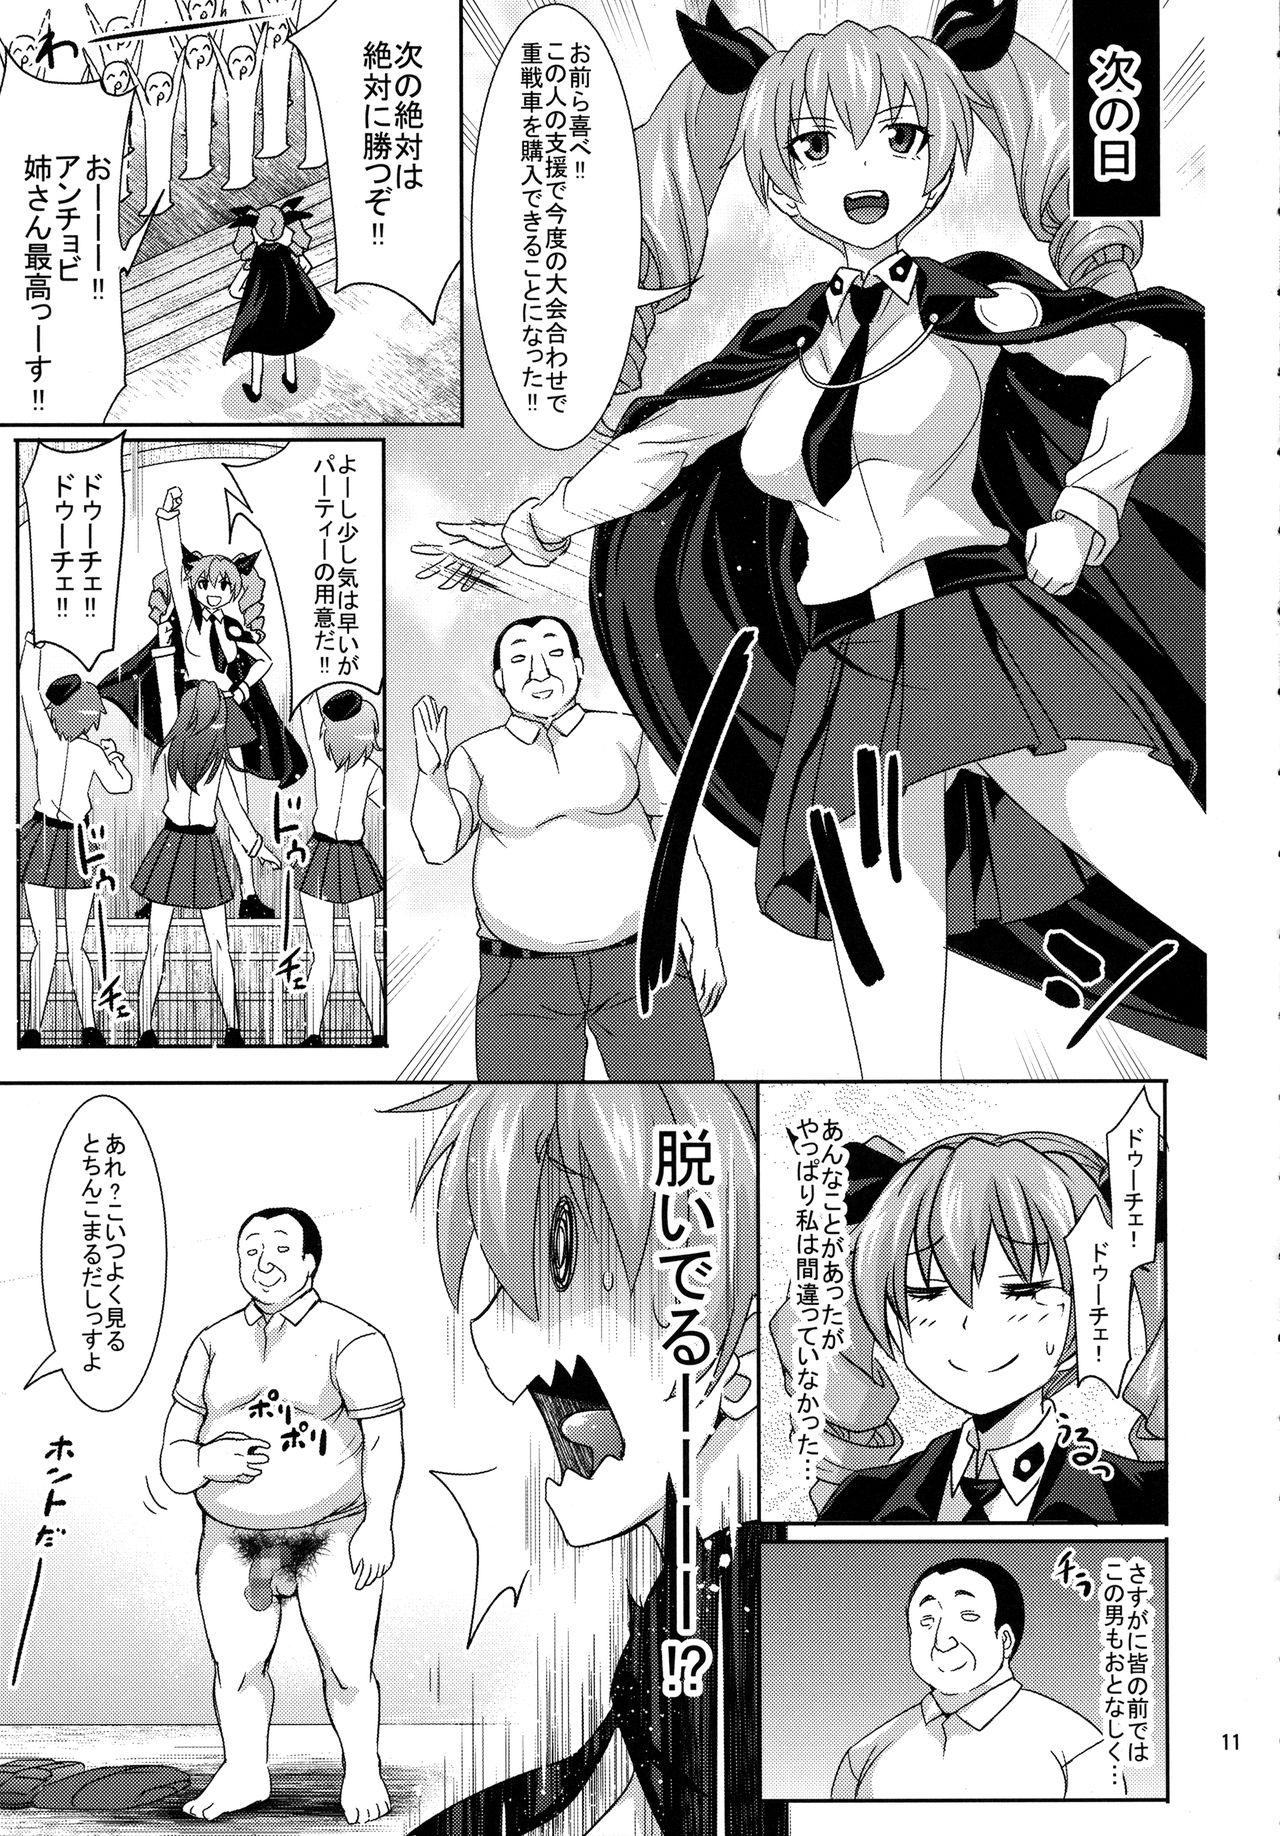 Butt Plug Anchovy to Duce! Duce! - Girls und panzer Sex - Page 10